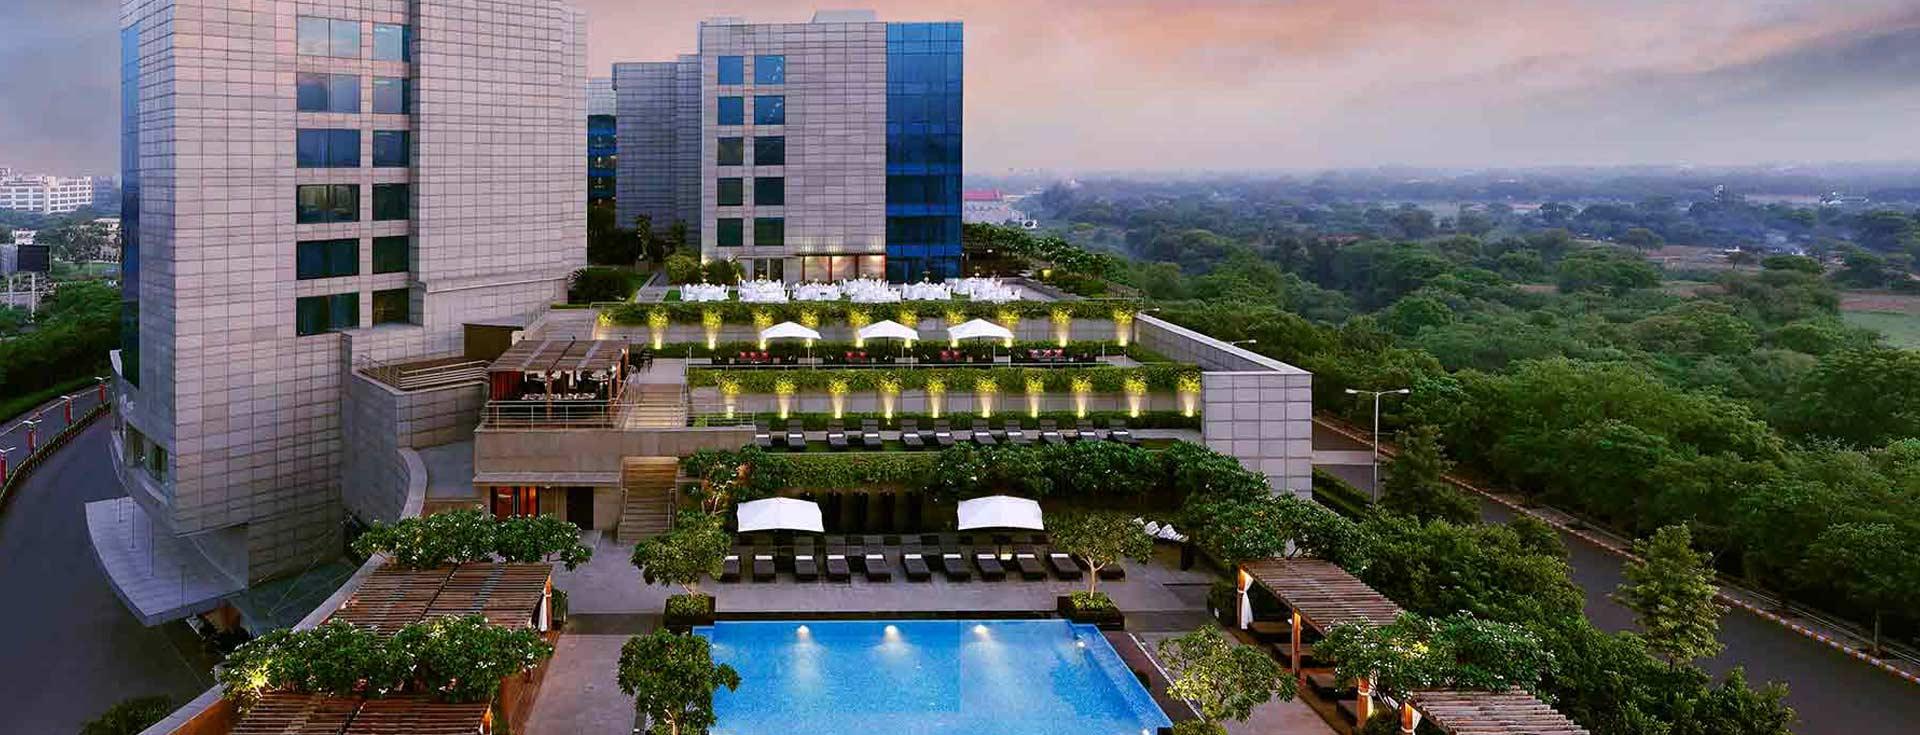 Why you should book The Leela Ambience Gurugram Hotel & Residences for your next business meet